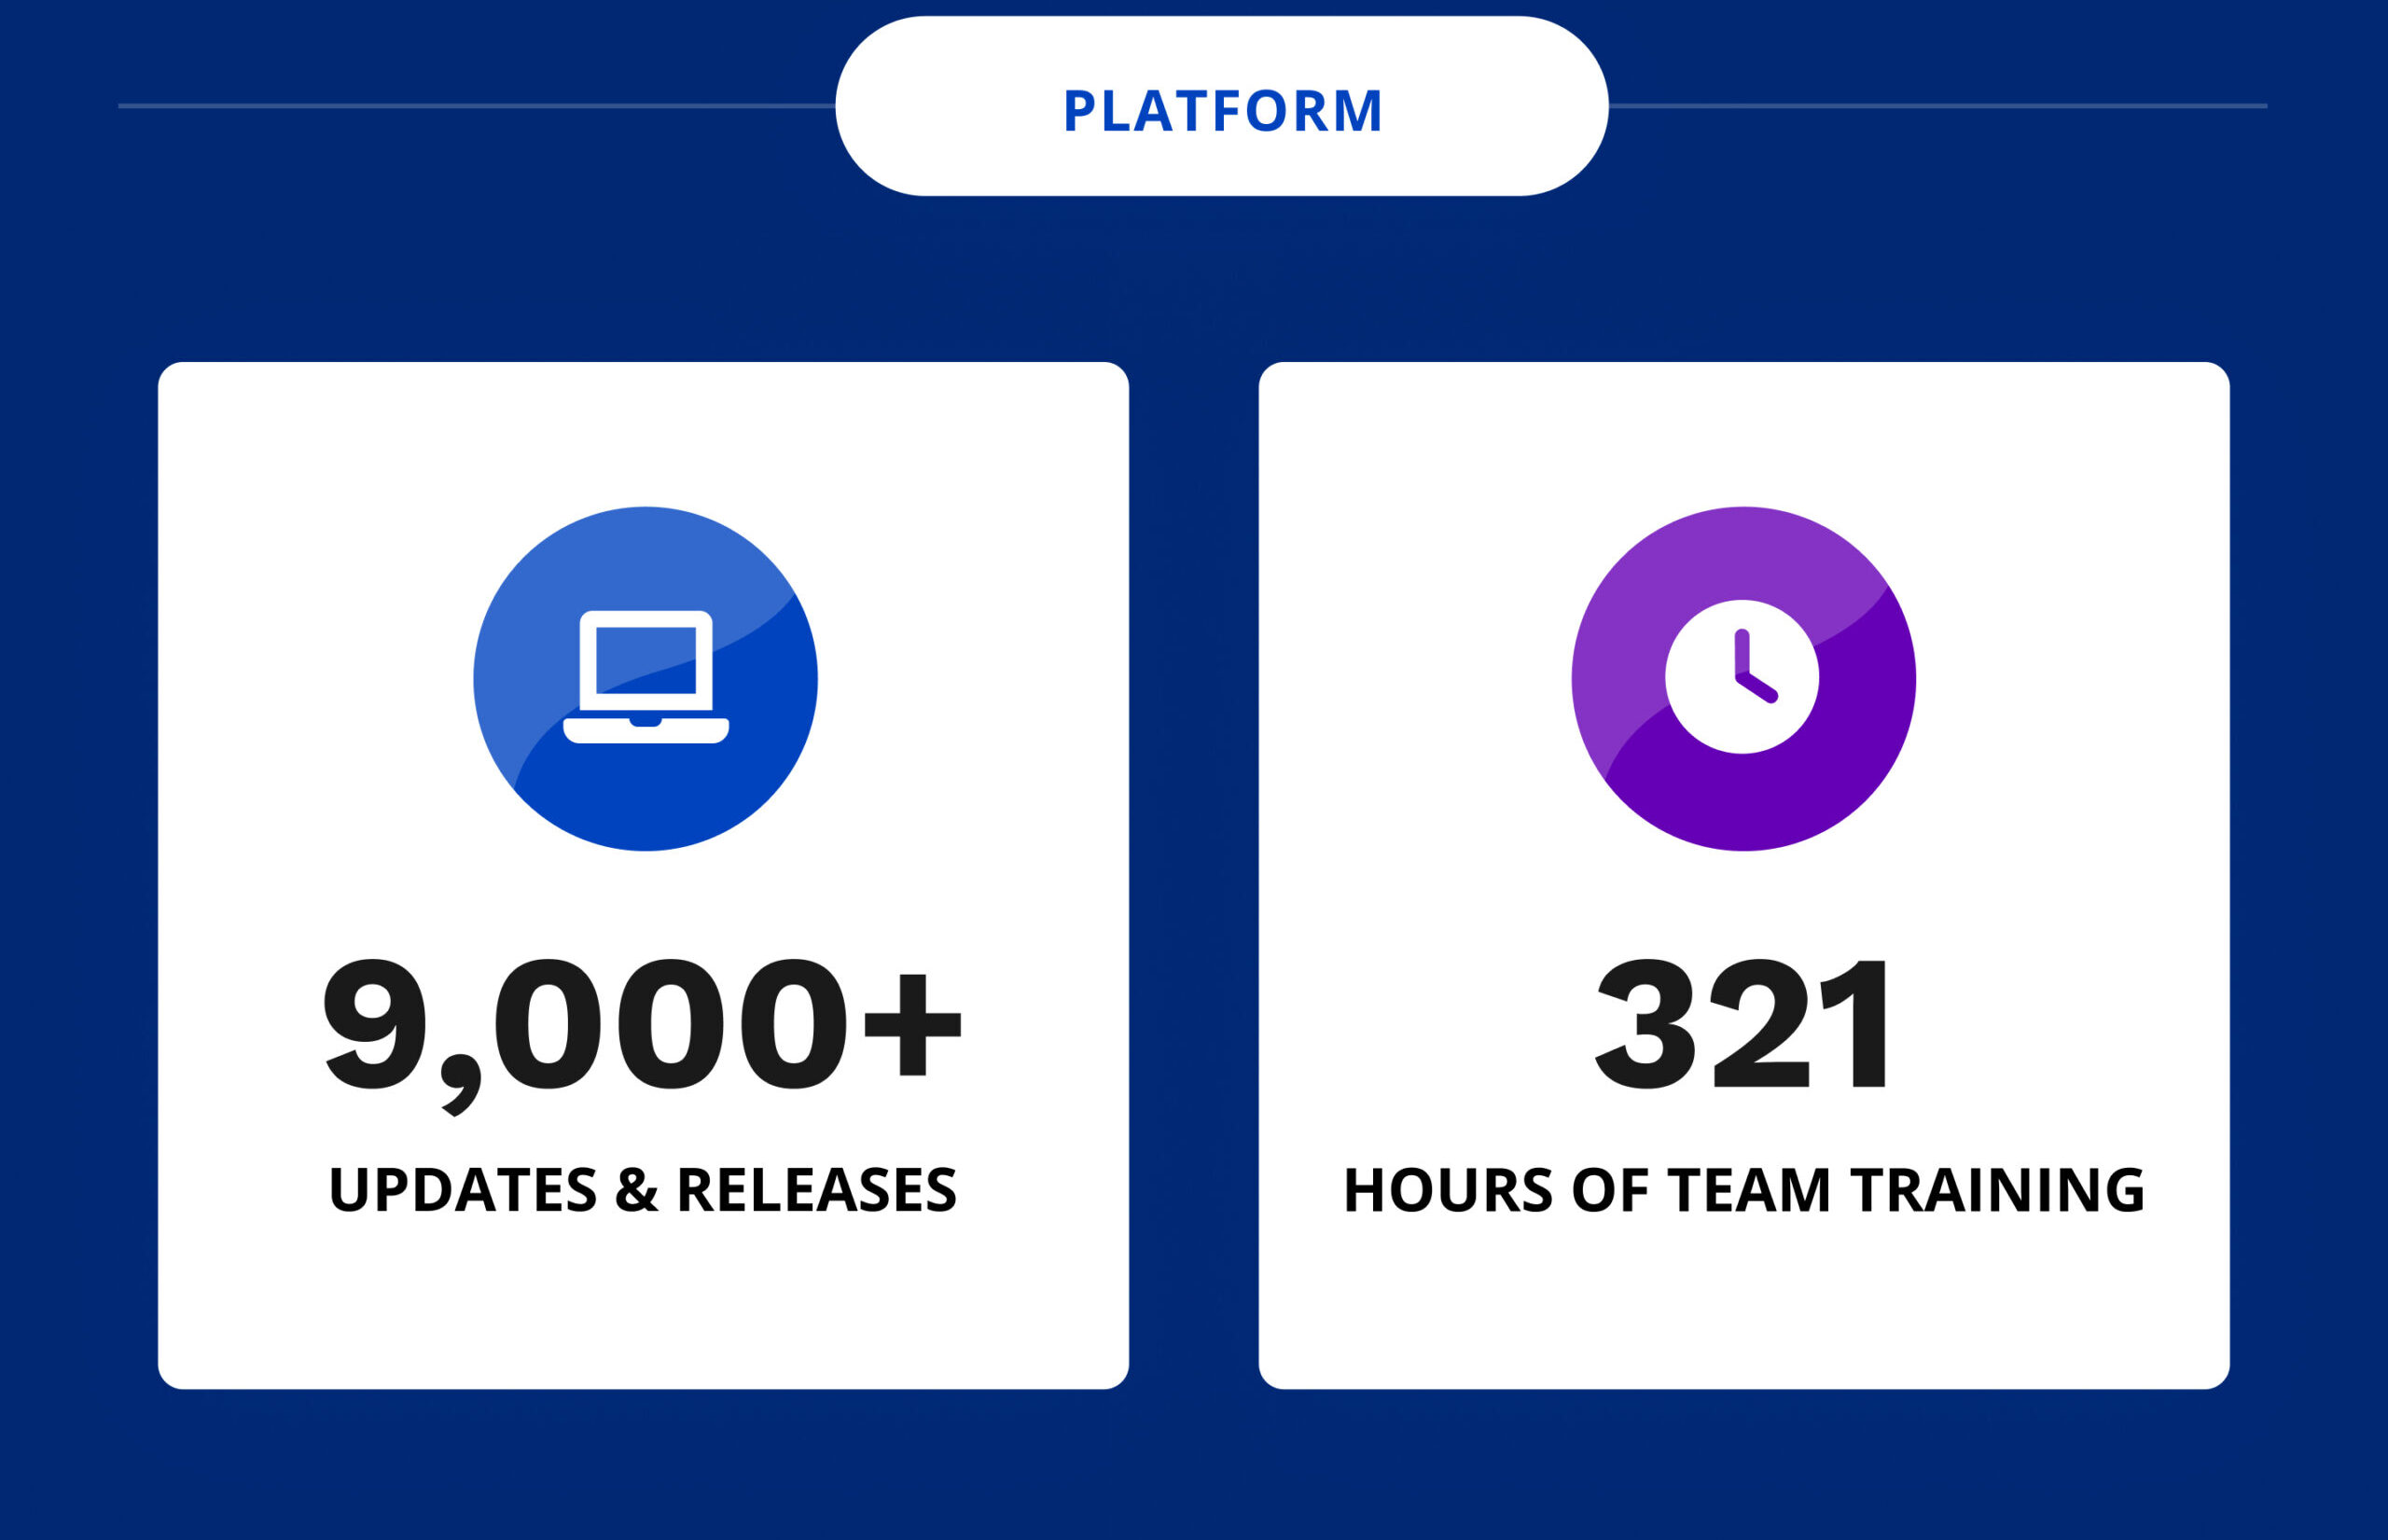 Platform: 9,0000+ updates and releases and 321 hours of team training